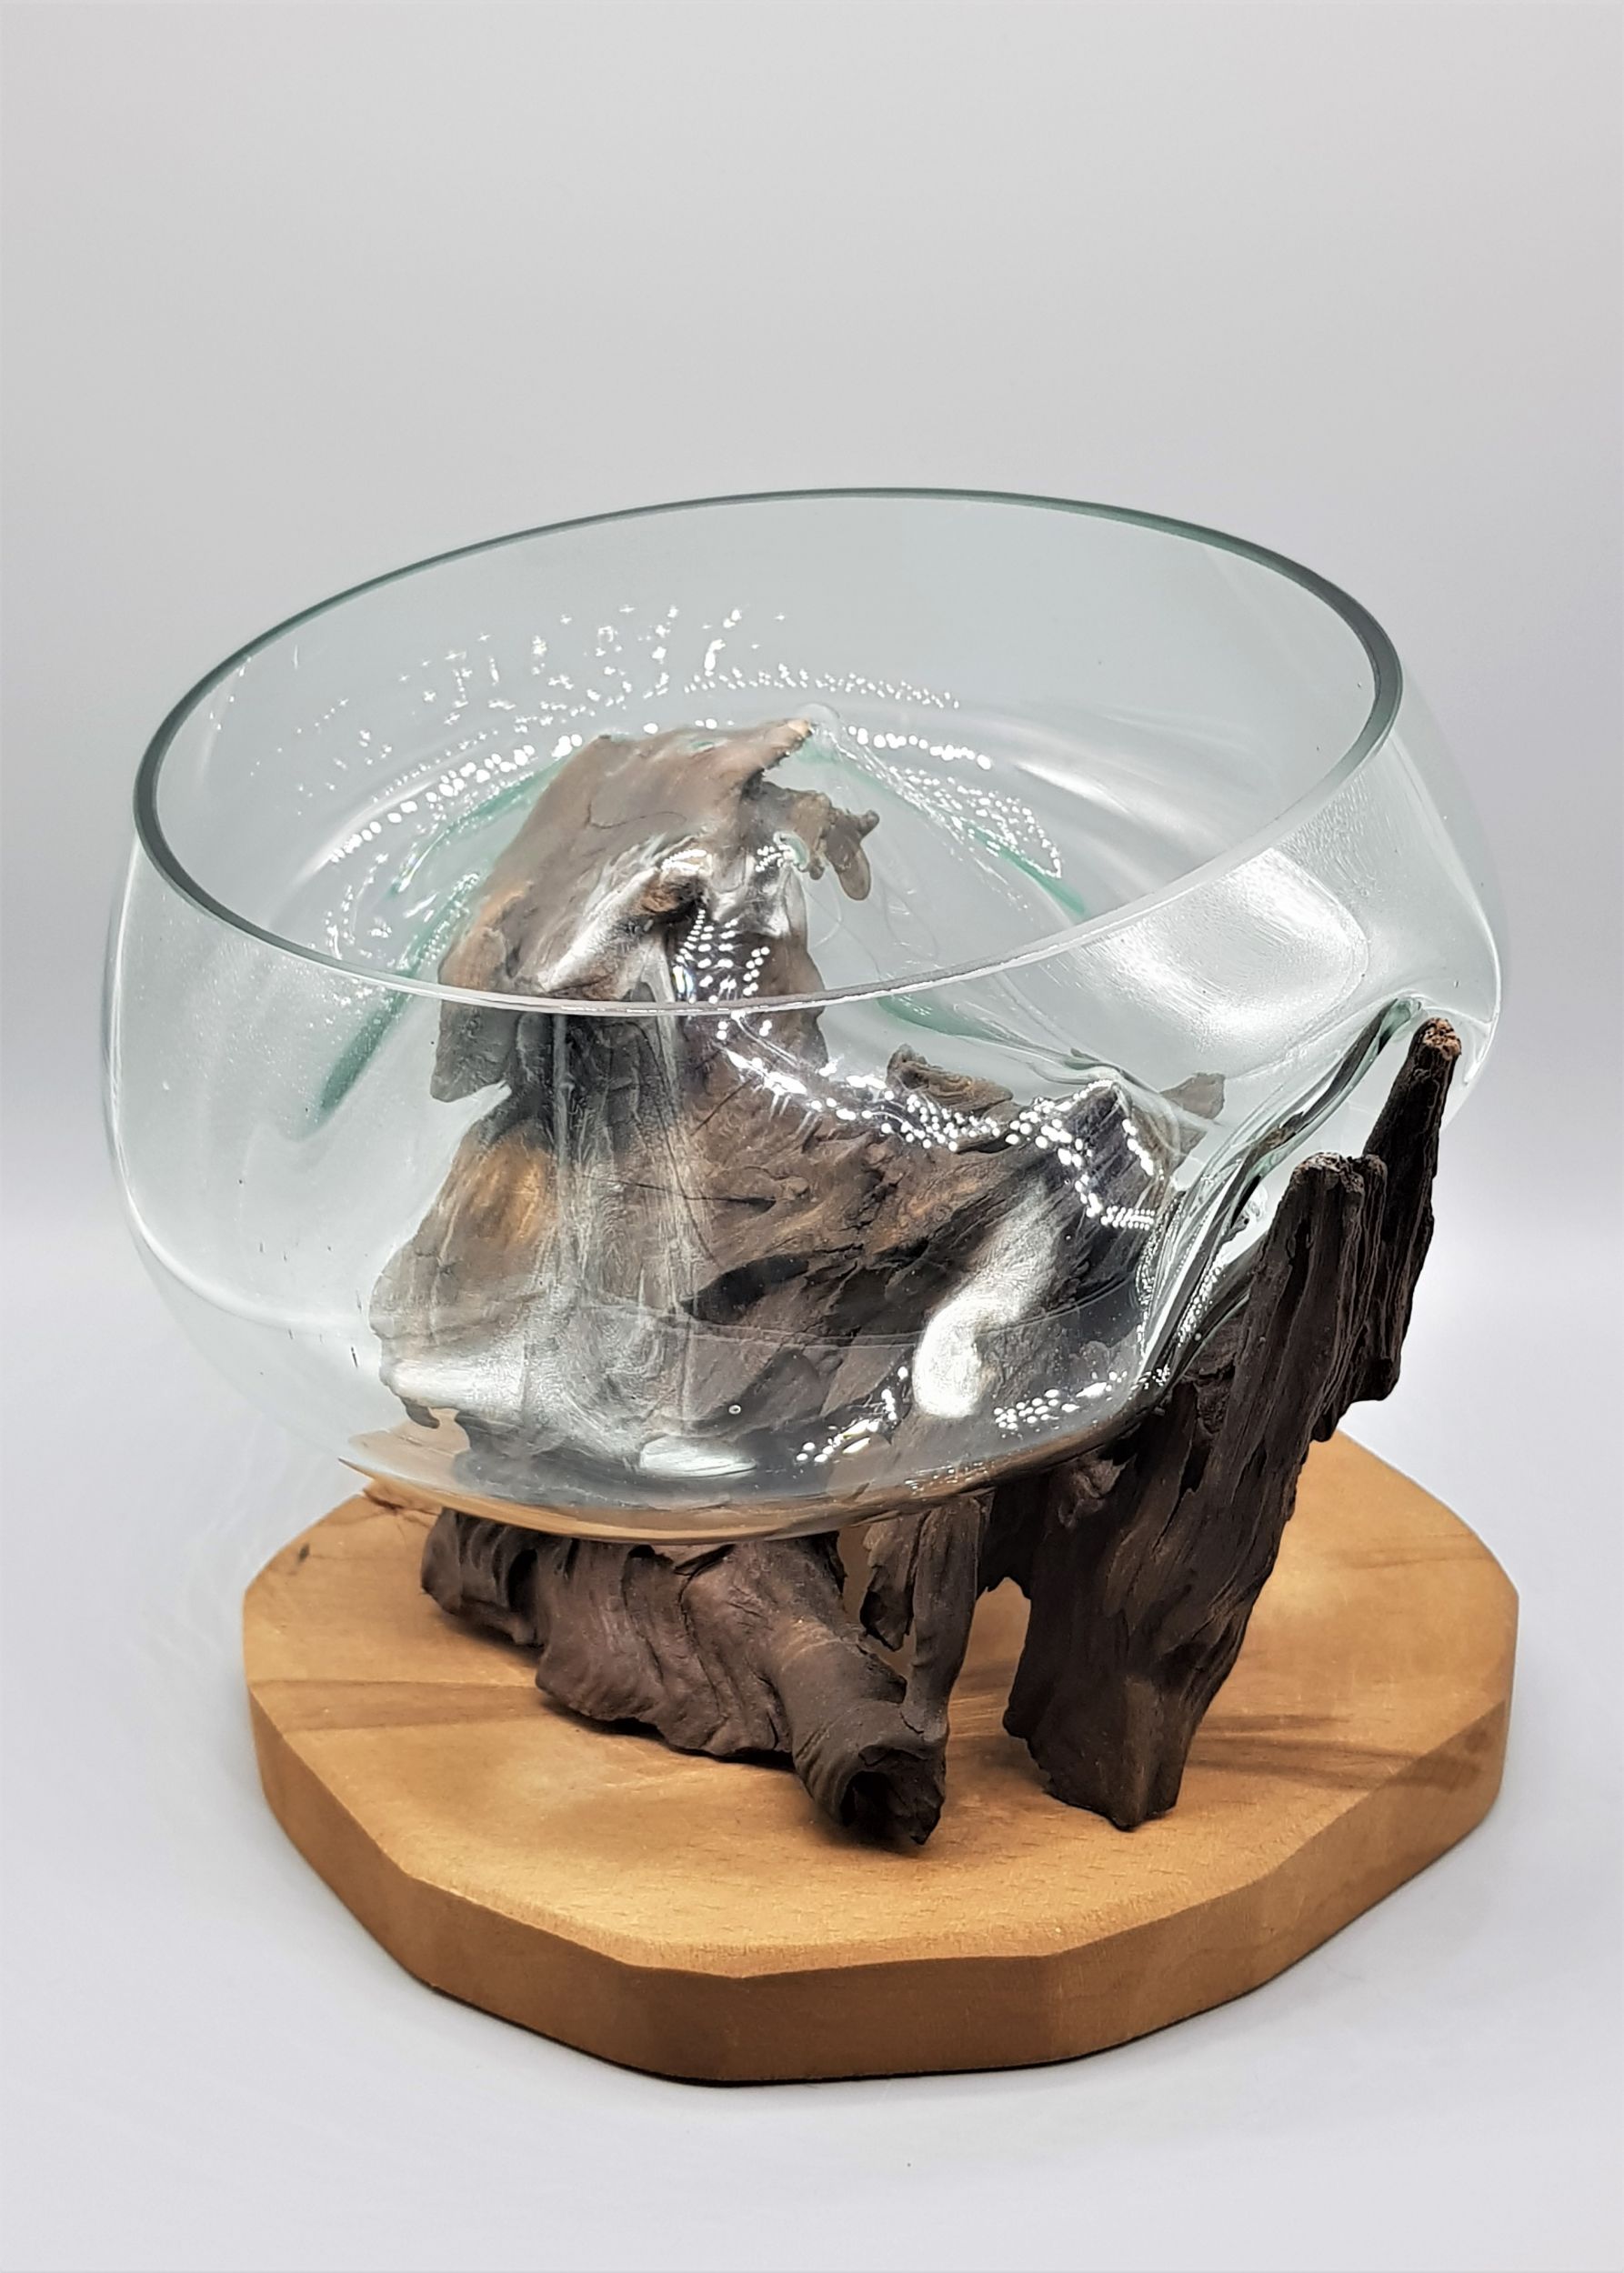 GLASS BOWL ON A ROOT 2